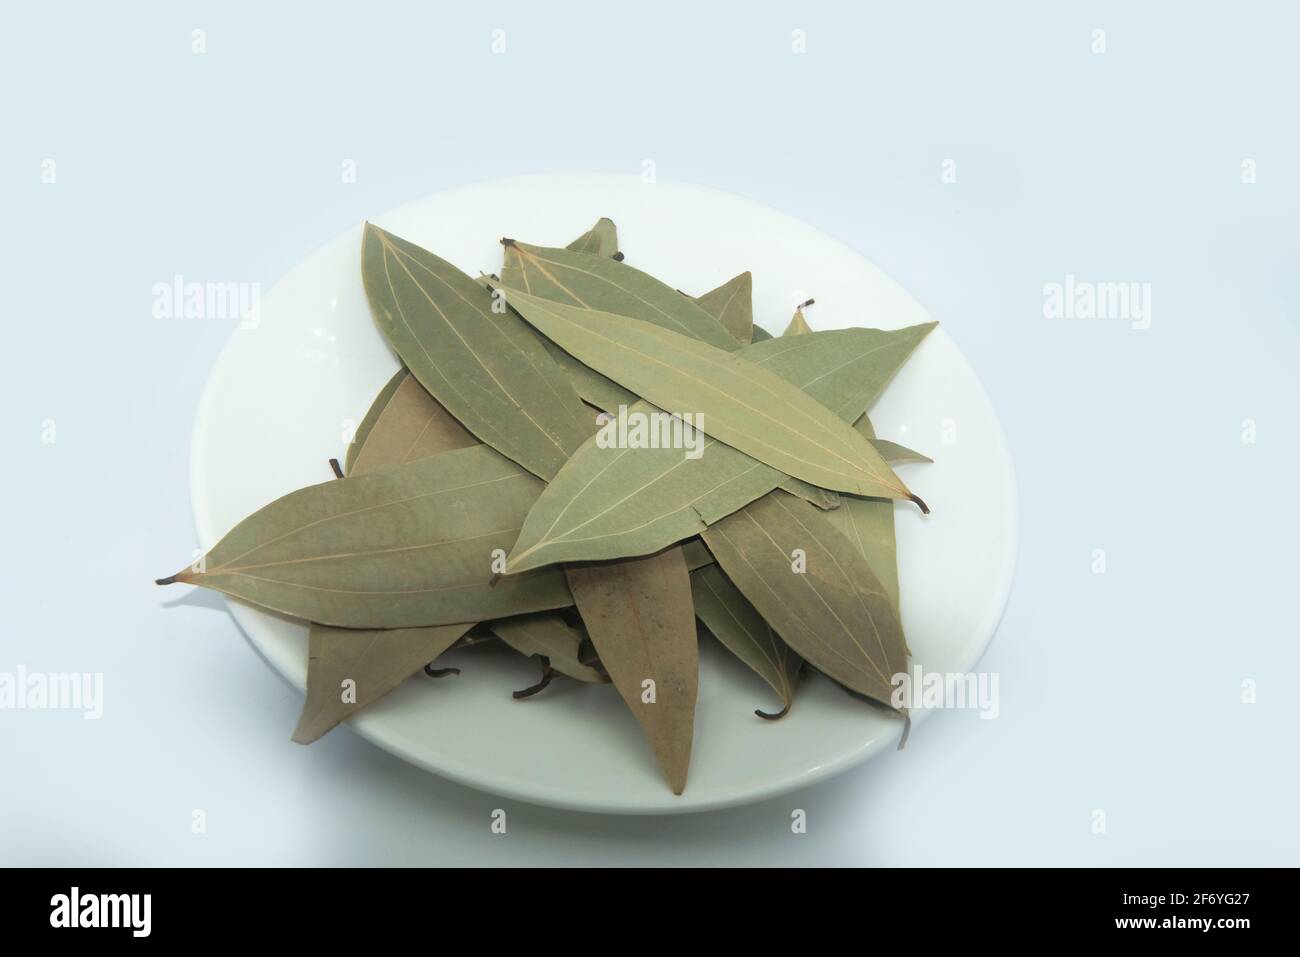 Mumbai , India - 15 March 2021, Dried Indian bay leaves or tejpatta or Bay laurel (Laurus nobilis, Lauraceae) are used in cooking for their distinctiv Stock Photo